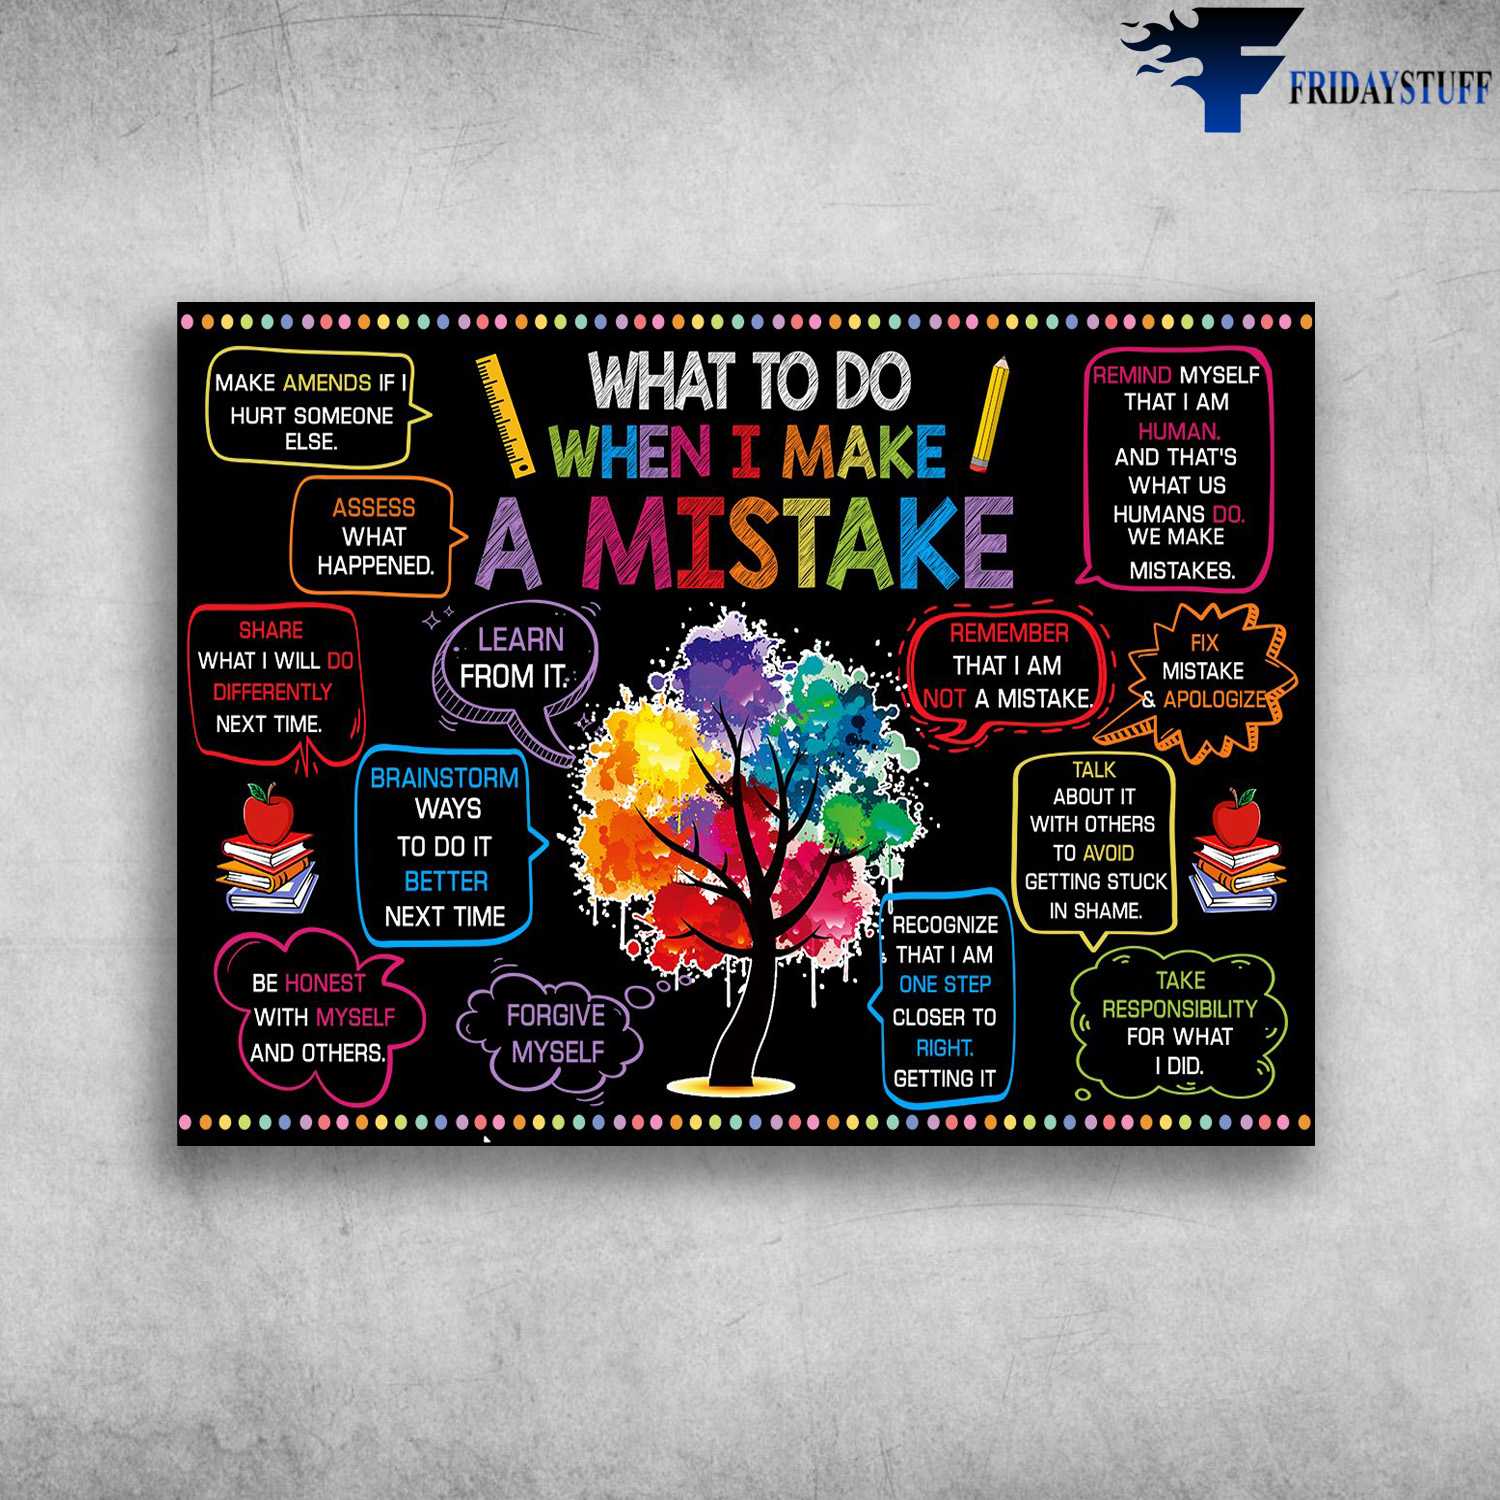 Back To School - What To Do When I Make A Mistake, Make Amends If I Hurt Someone Else, Assess What Happened, Learn From It, Remember That I Am Not Mistake